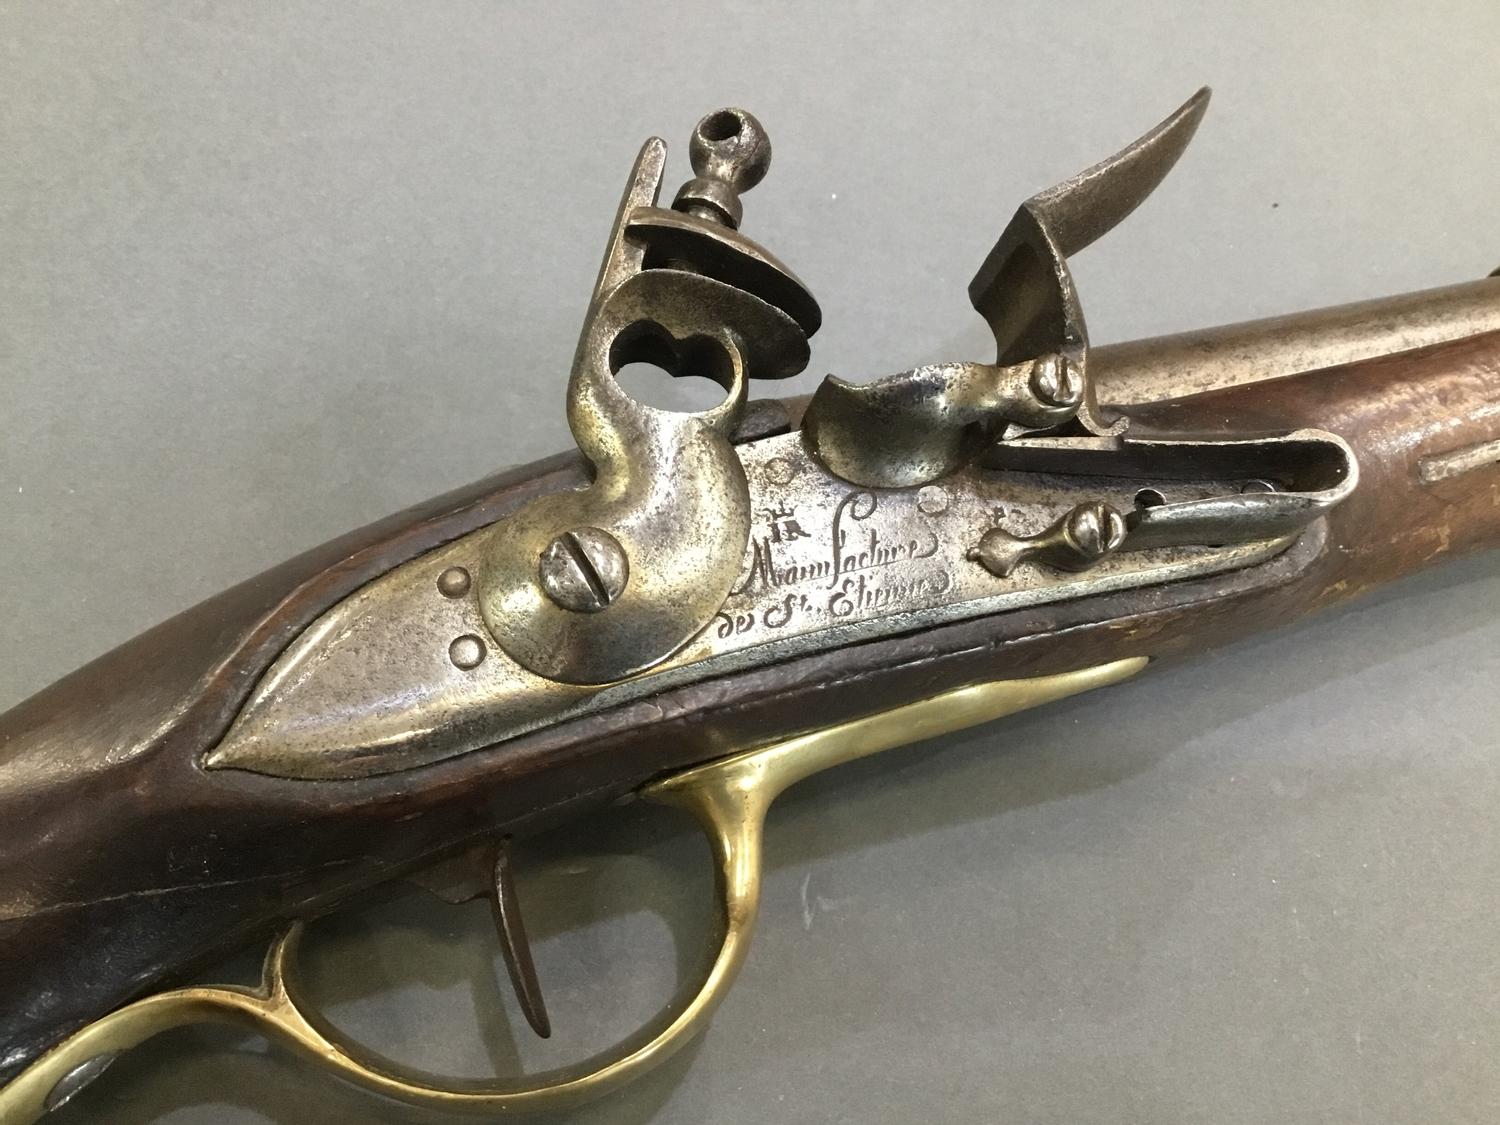 A late 18th Century French flintlock pistol engraved 'Manufacture do St Etienne' - Image 2 of 5